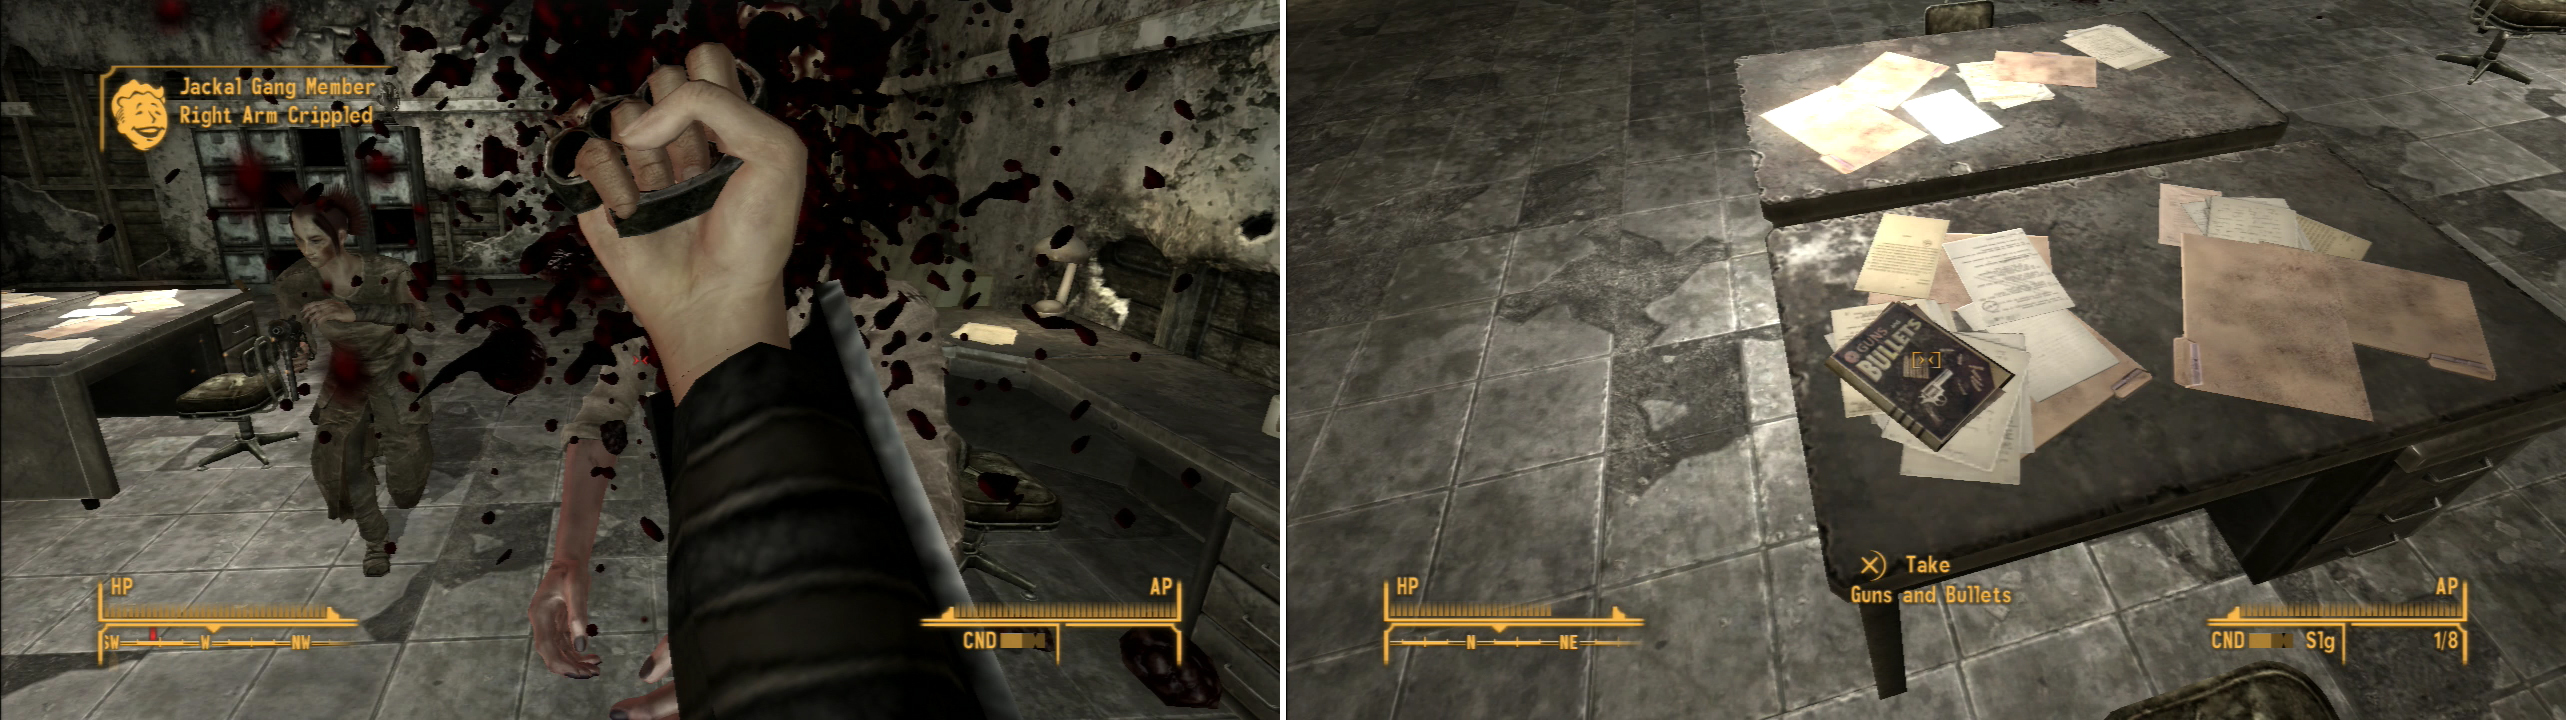 Defeat the Jackal Gangers in and around the Nevada Highway Patrol Station (left) and grab the copy of Guns and Bullets on a desk inside the station (right).